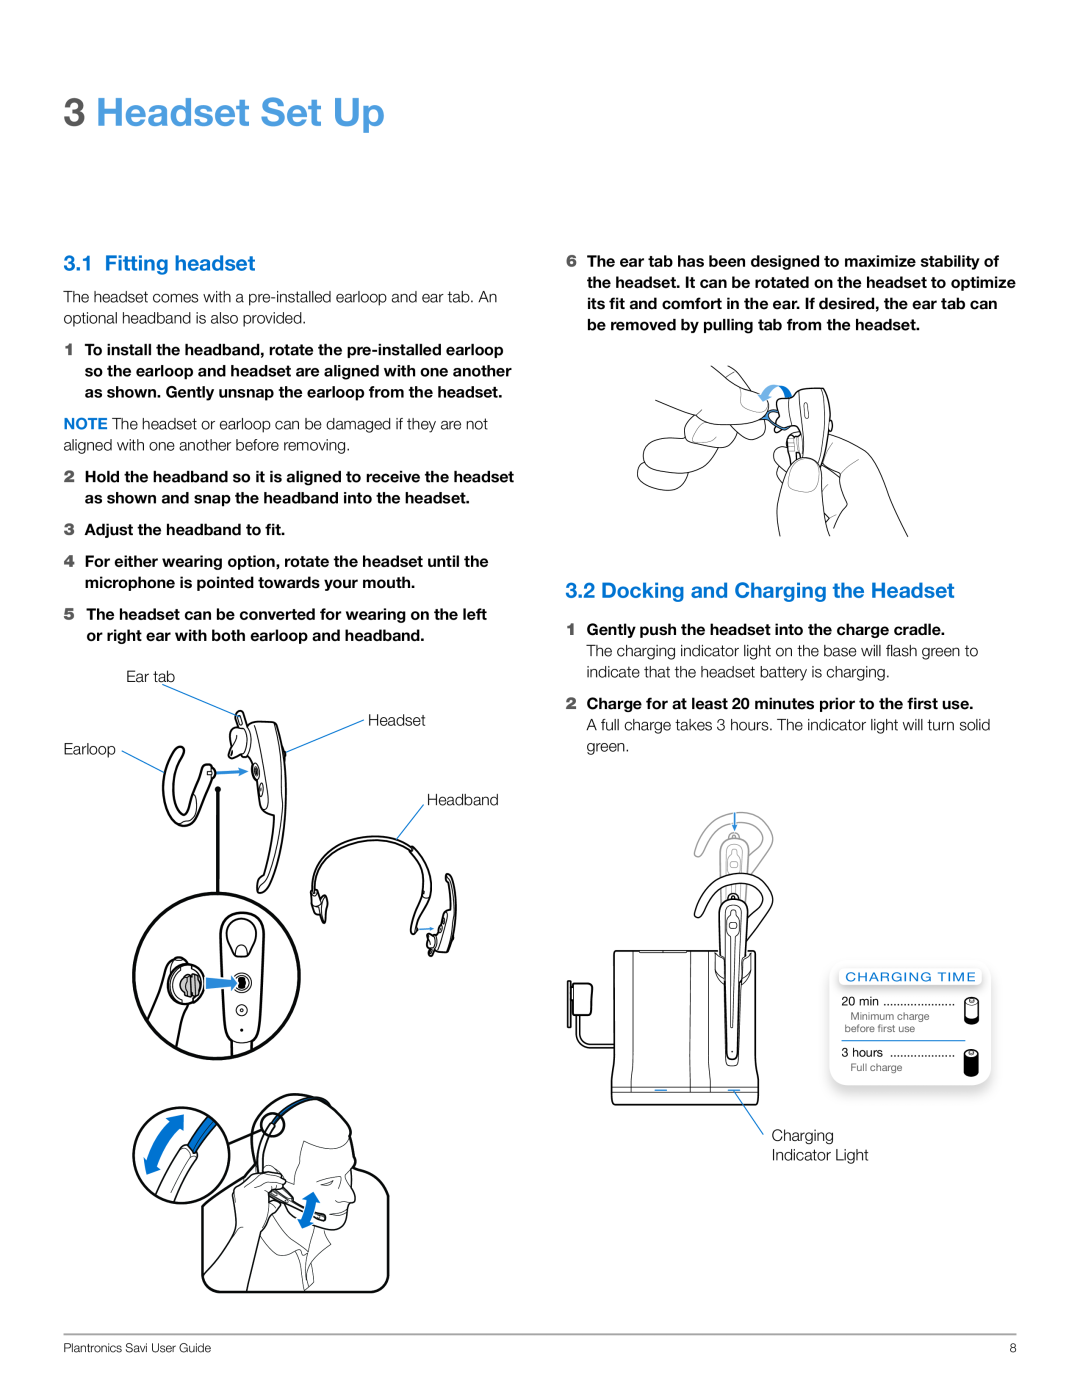 Plantronics WO101 manual Headset Set Up, Fitting headset, Docking and Charging the Headset 